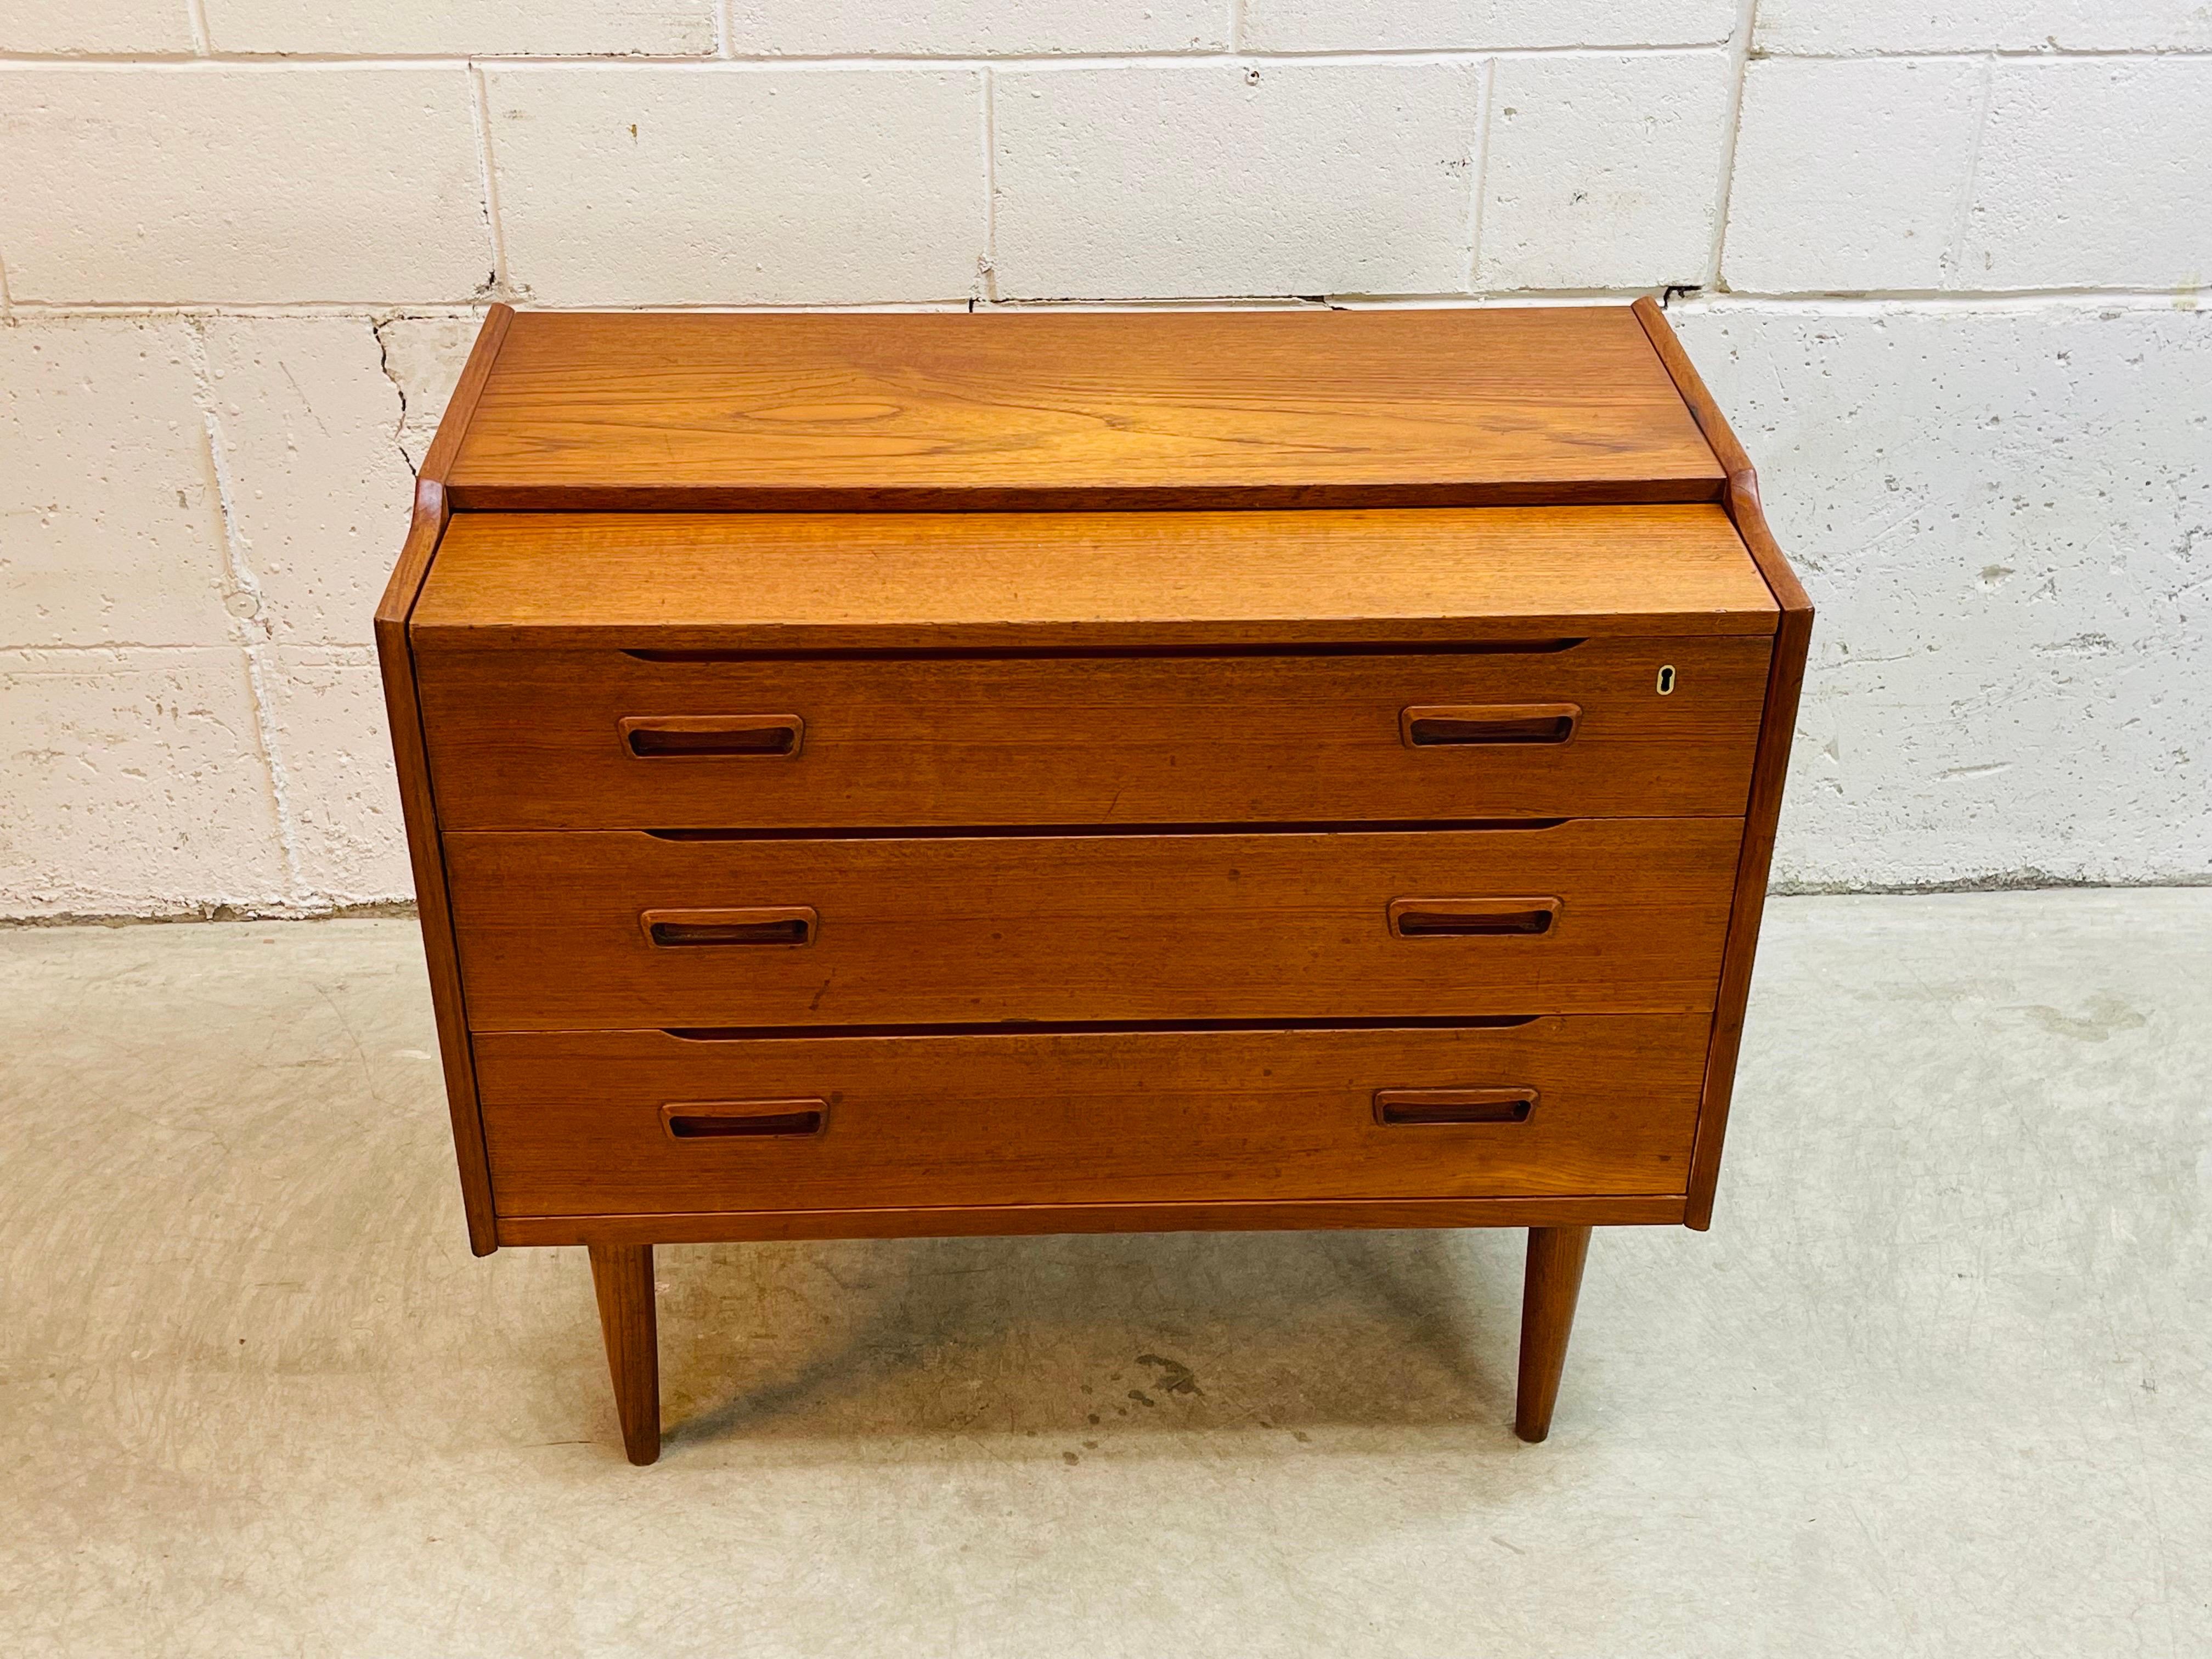 Vintage 1960s Danish teak wood vanity and storage cabinet. Vanity has two drawers for storage amd the drawers are 5.25”H. Top drawer pulls out to reveal a full vanity set yp with mirror and compartment storage. Vanity is in original condition and is